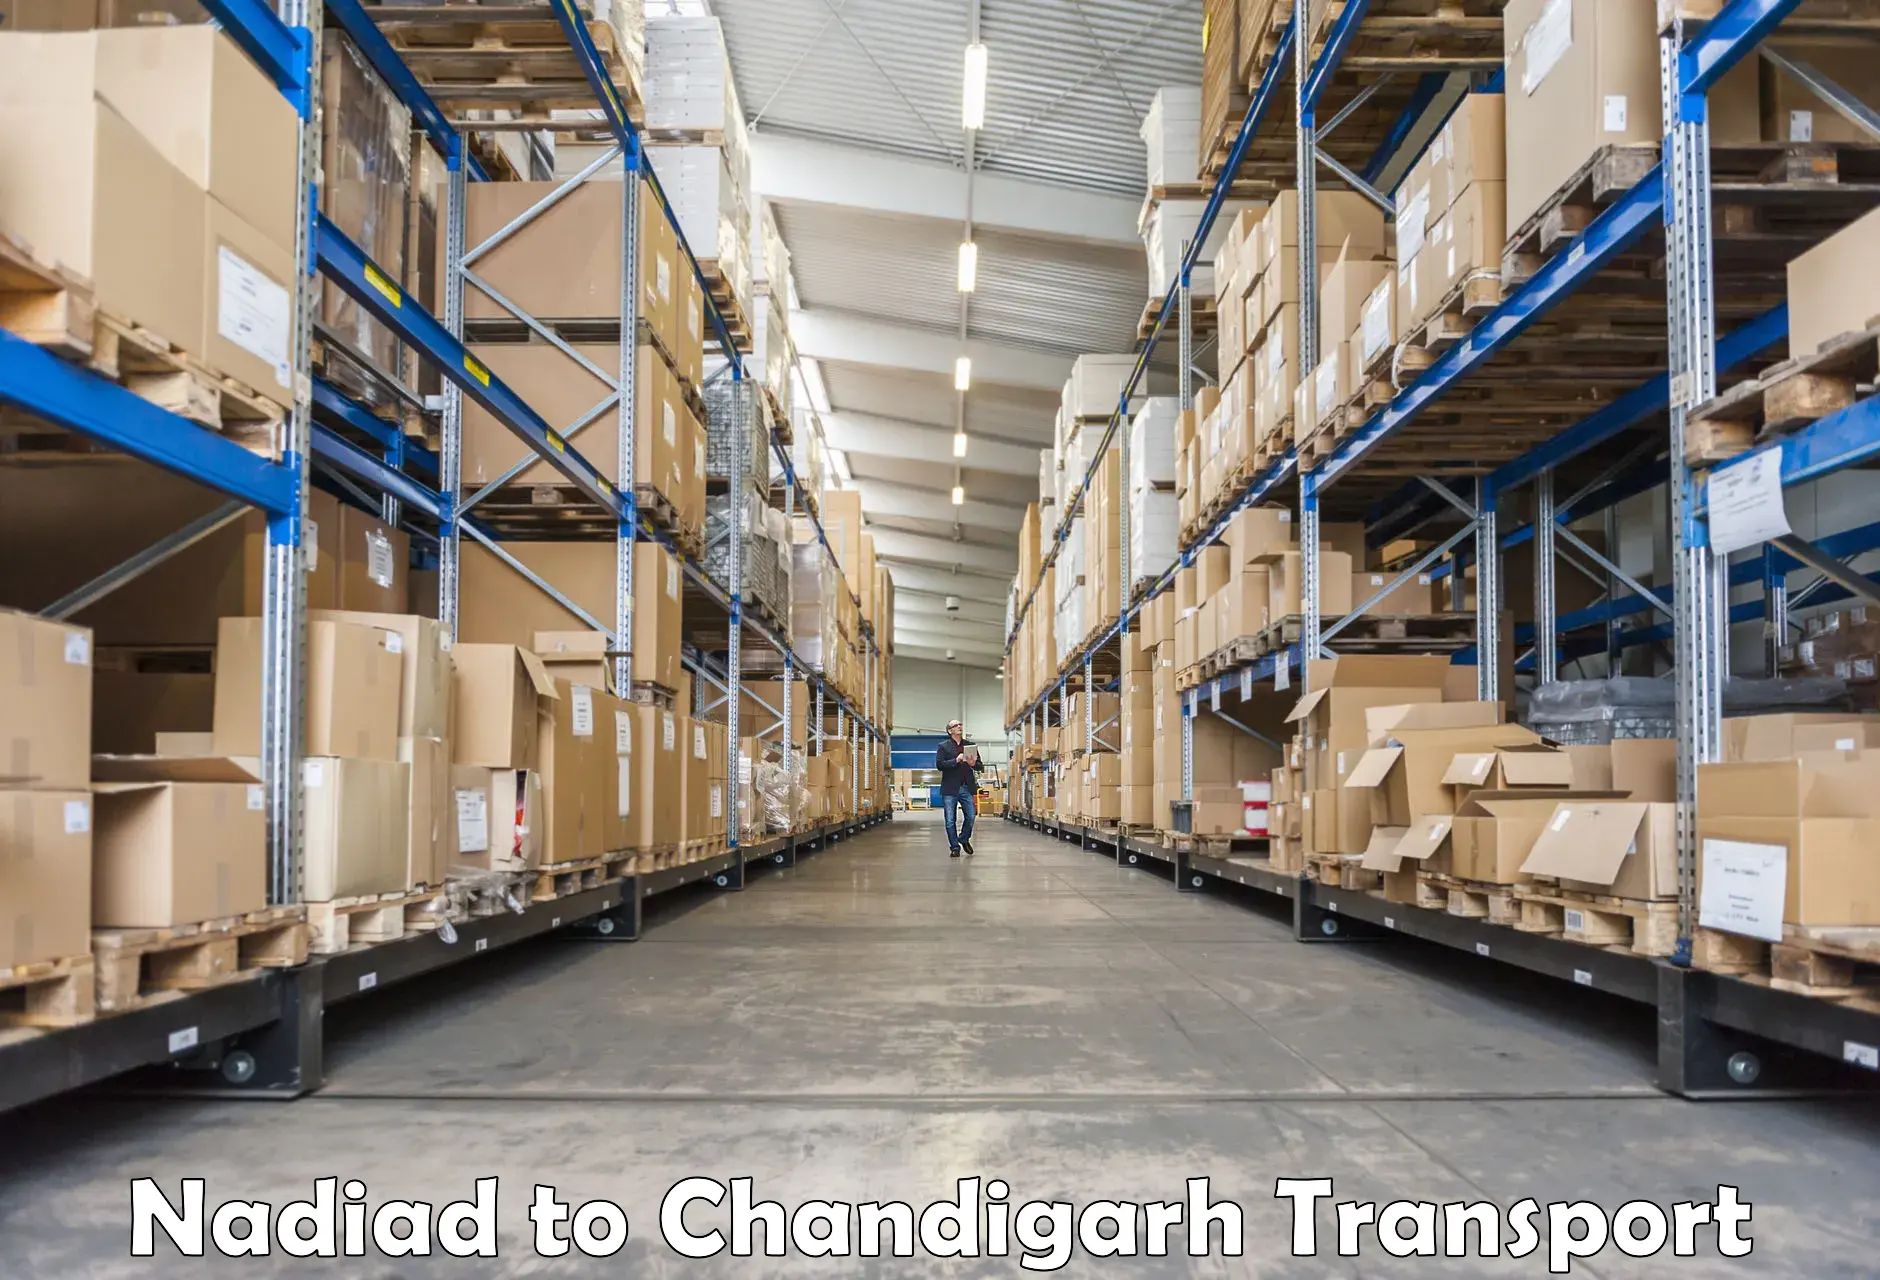 Transport bike from one state to another Nadiad to Chandigarh